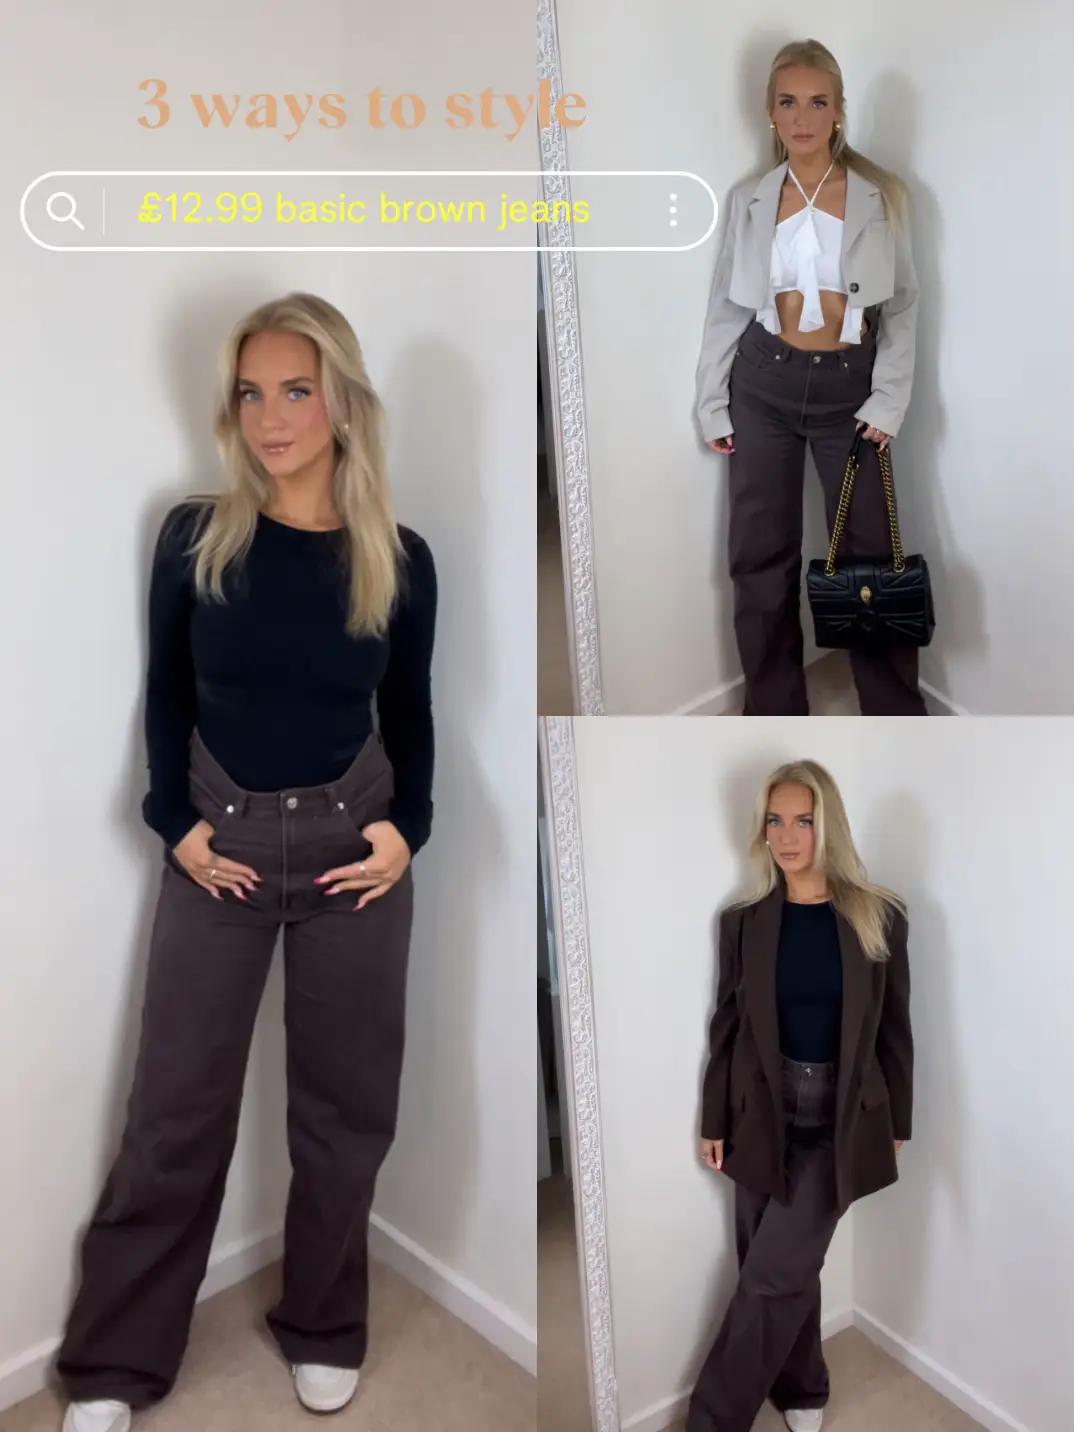 3 ways to style brown faux leather pants!✨ 1, 2, or 3?! Which style is your  favorite?!☺️ You can quickly shop all my outfits in the